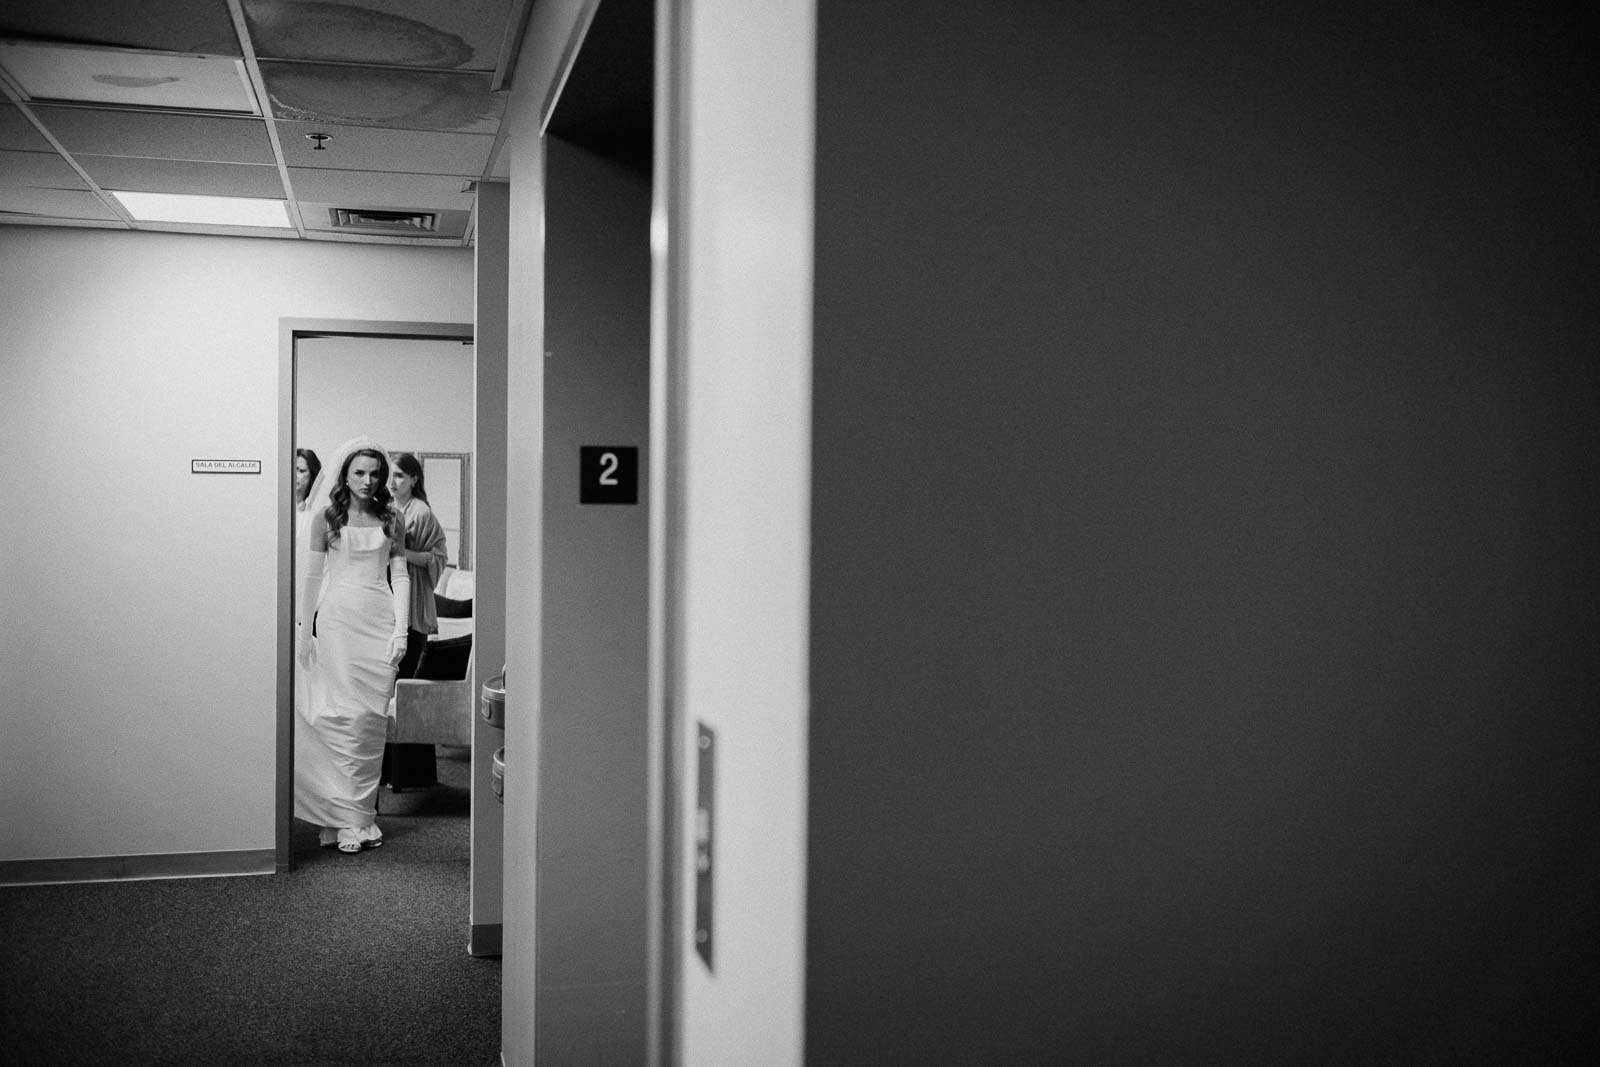 The bride leaves the bridal room to the wedding ceremony